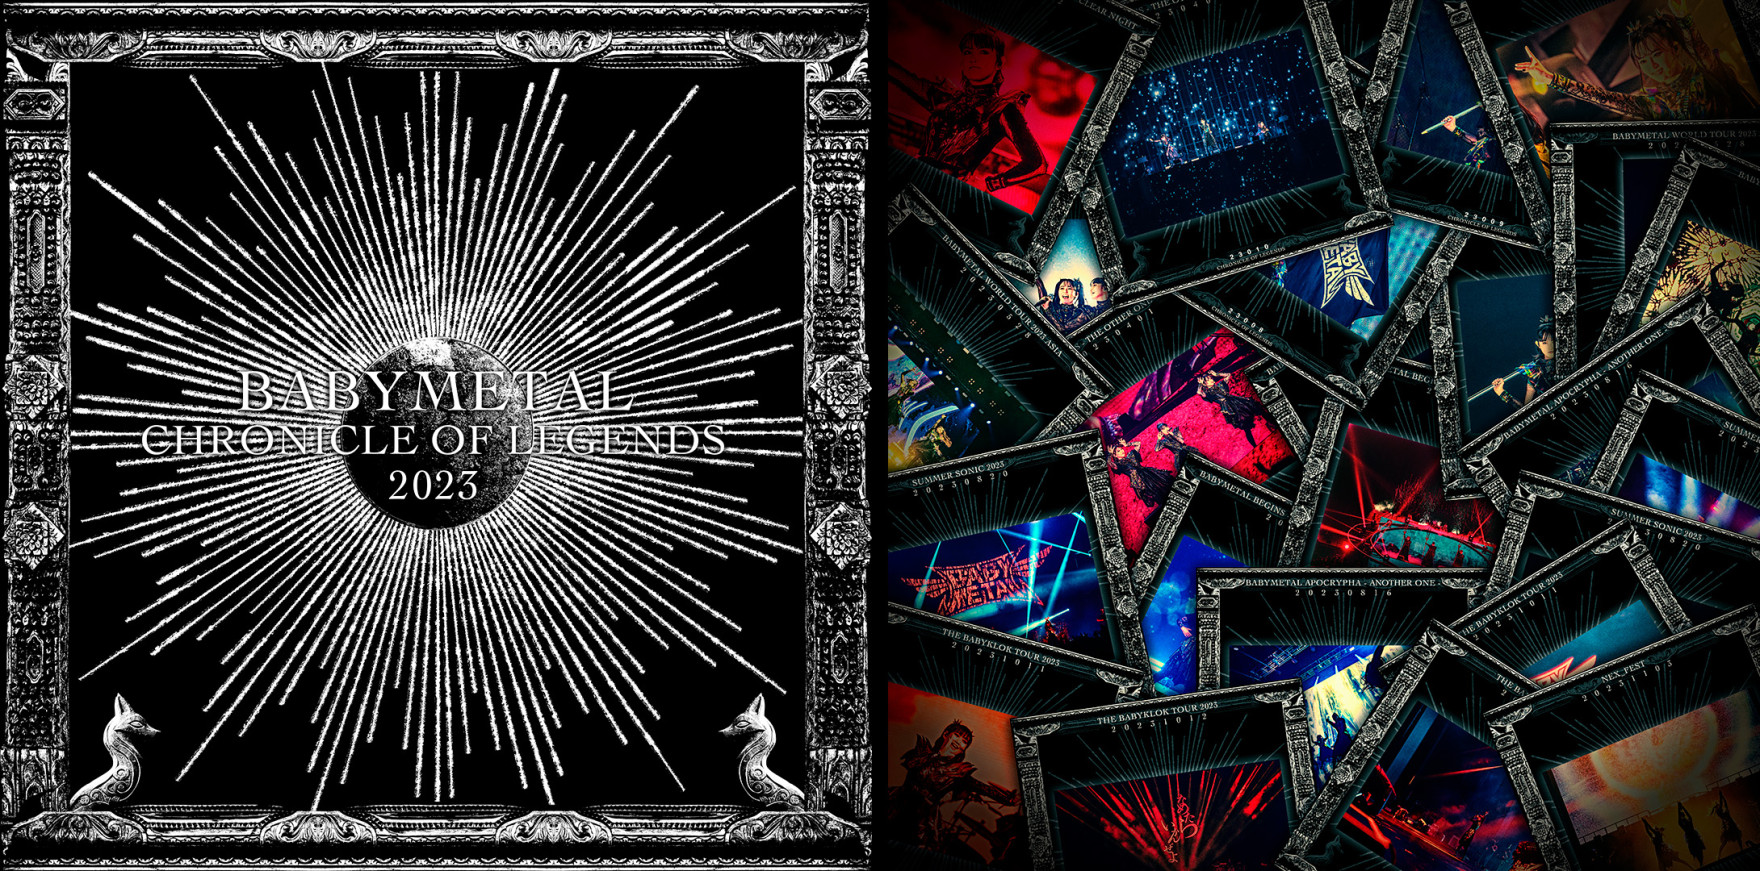 Digital Photo Card "CHRONICLE OF LEGENDS 2023" granted as NFT at BABYMETAL's "THE ONE - 2024"